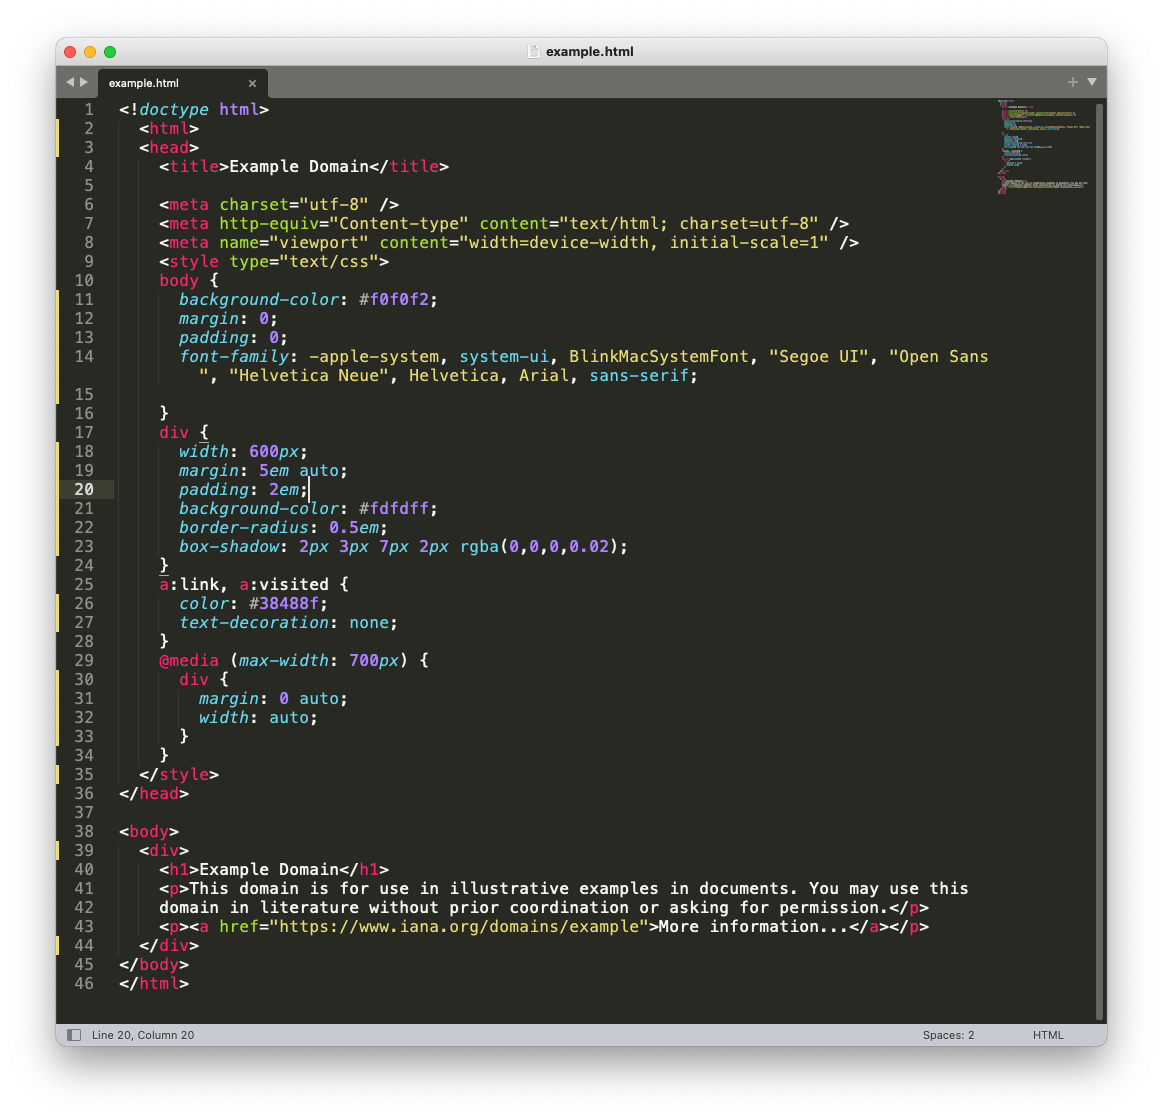 Sublime Text main screen screenshot with an example html file loaded for editing